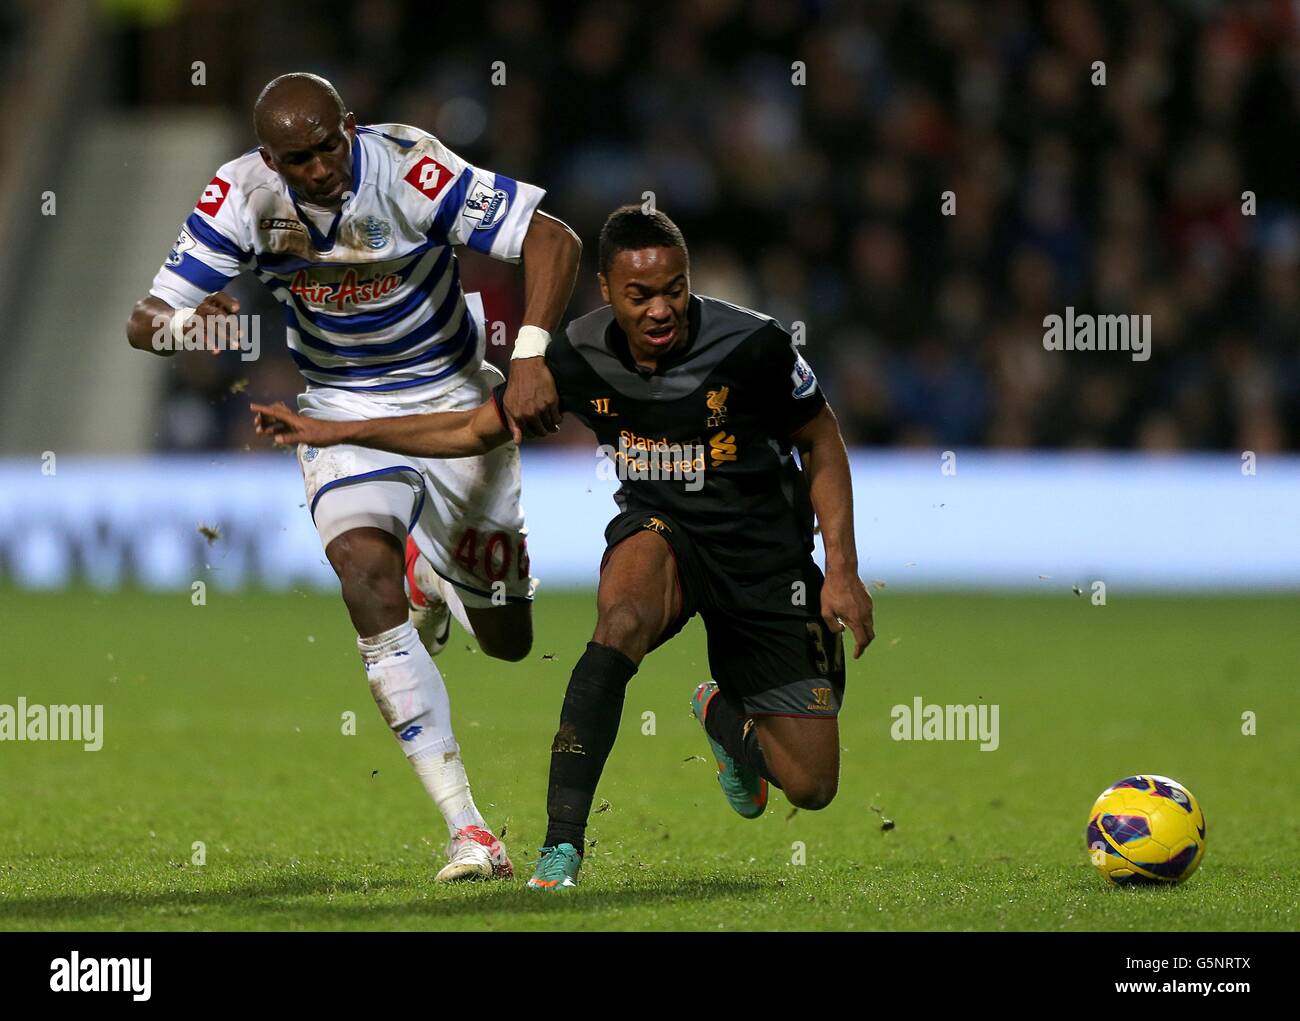 Soccer - Barclays Premier League - Queens Park Rangers v Liverpool - Loftus Road. Queens Park Rangers' Stephane Mbia (left) and Liverpool's Raheem Sterling battle for the ball Stock Photo